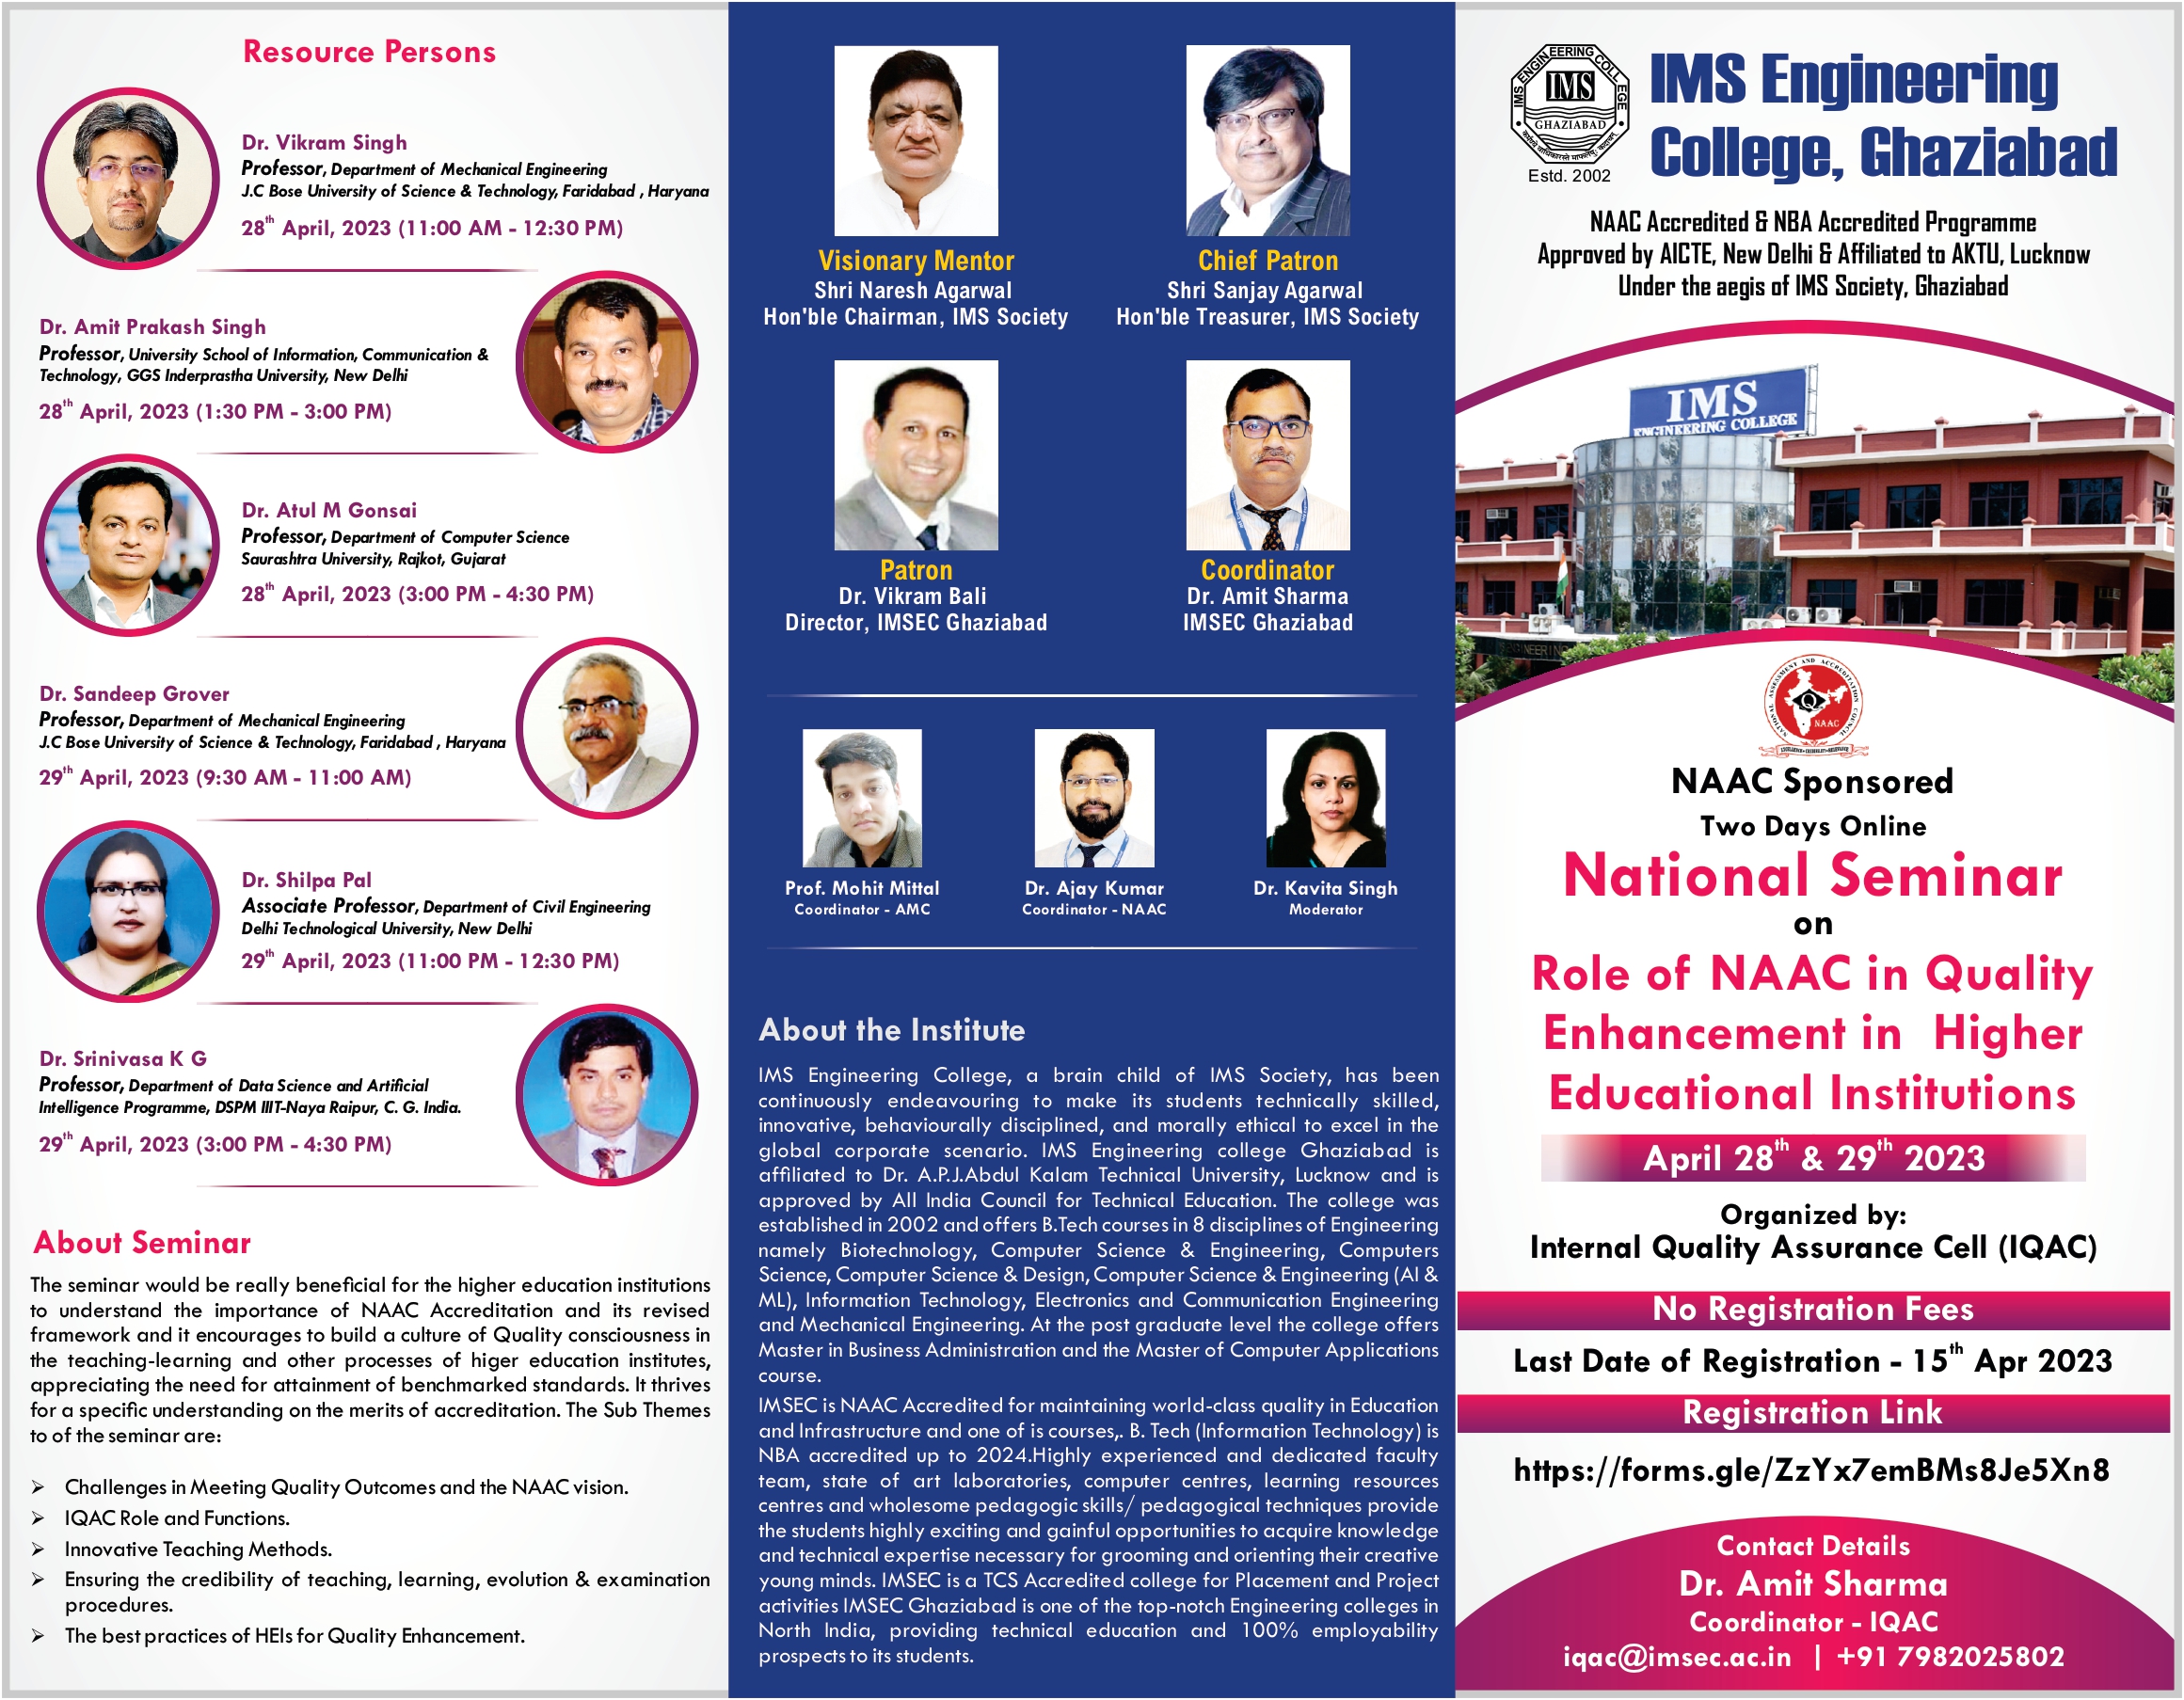 National Seminar on Role of NAAC in Quality Enhancement in Higher Educational Institution